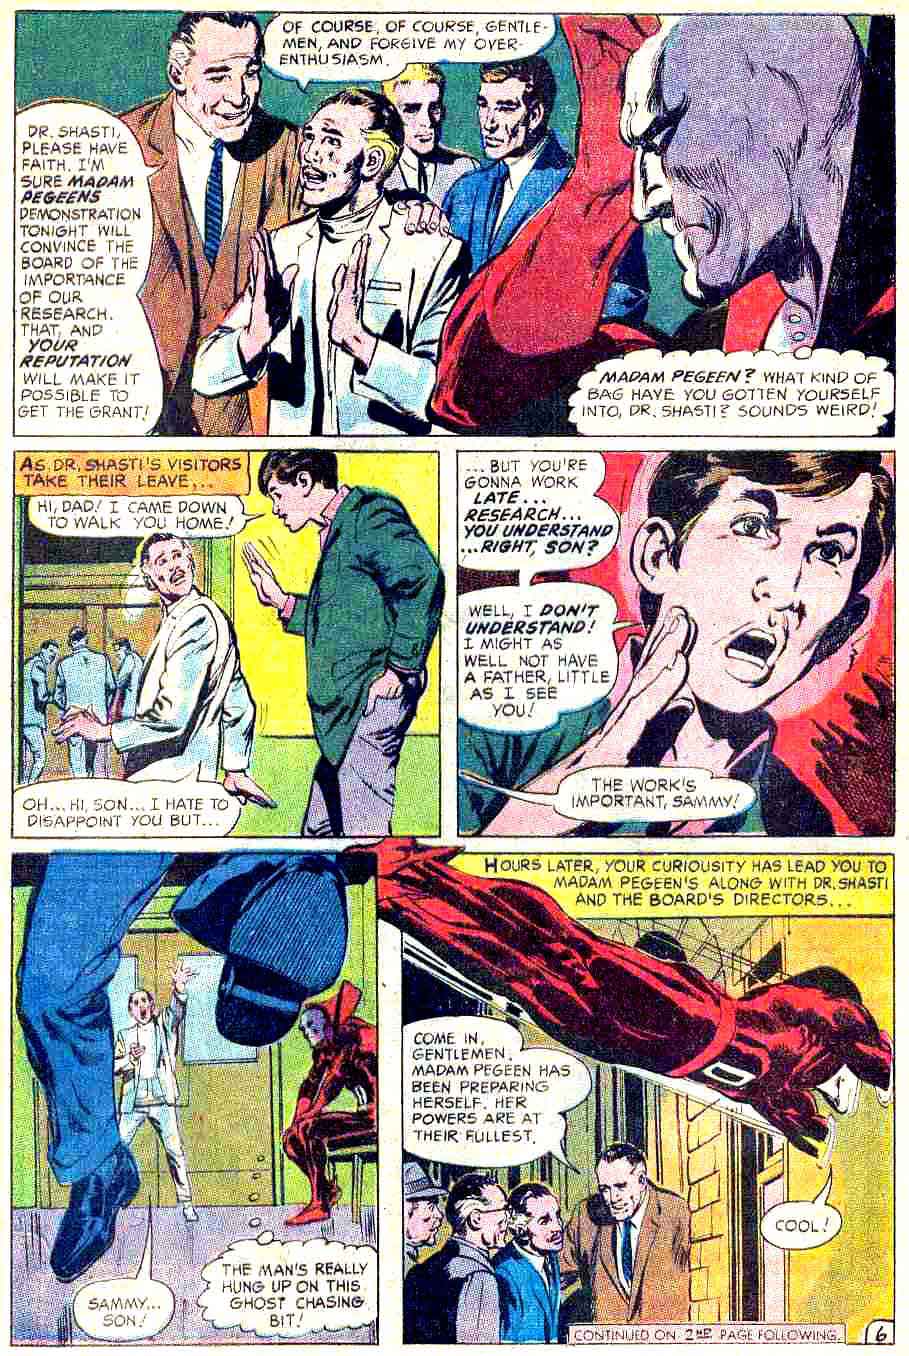 Strange Adventures v1 #213 dc 1960s silver age comic book page art by Neal Adams